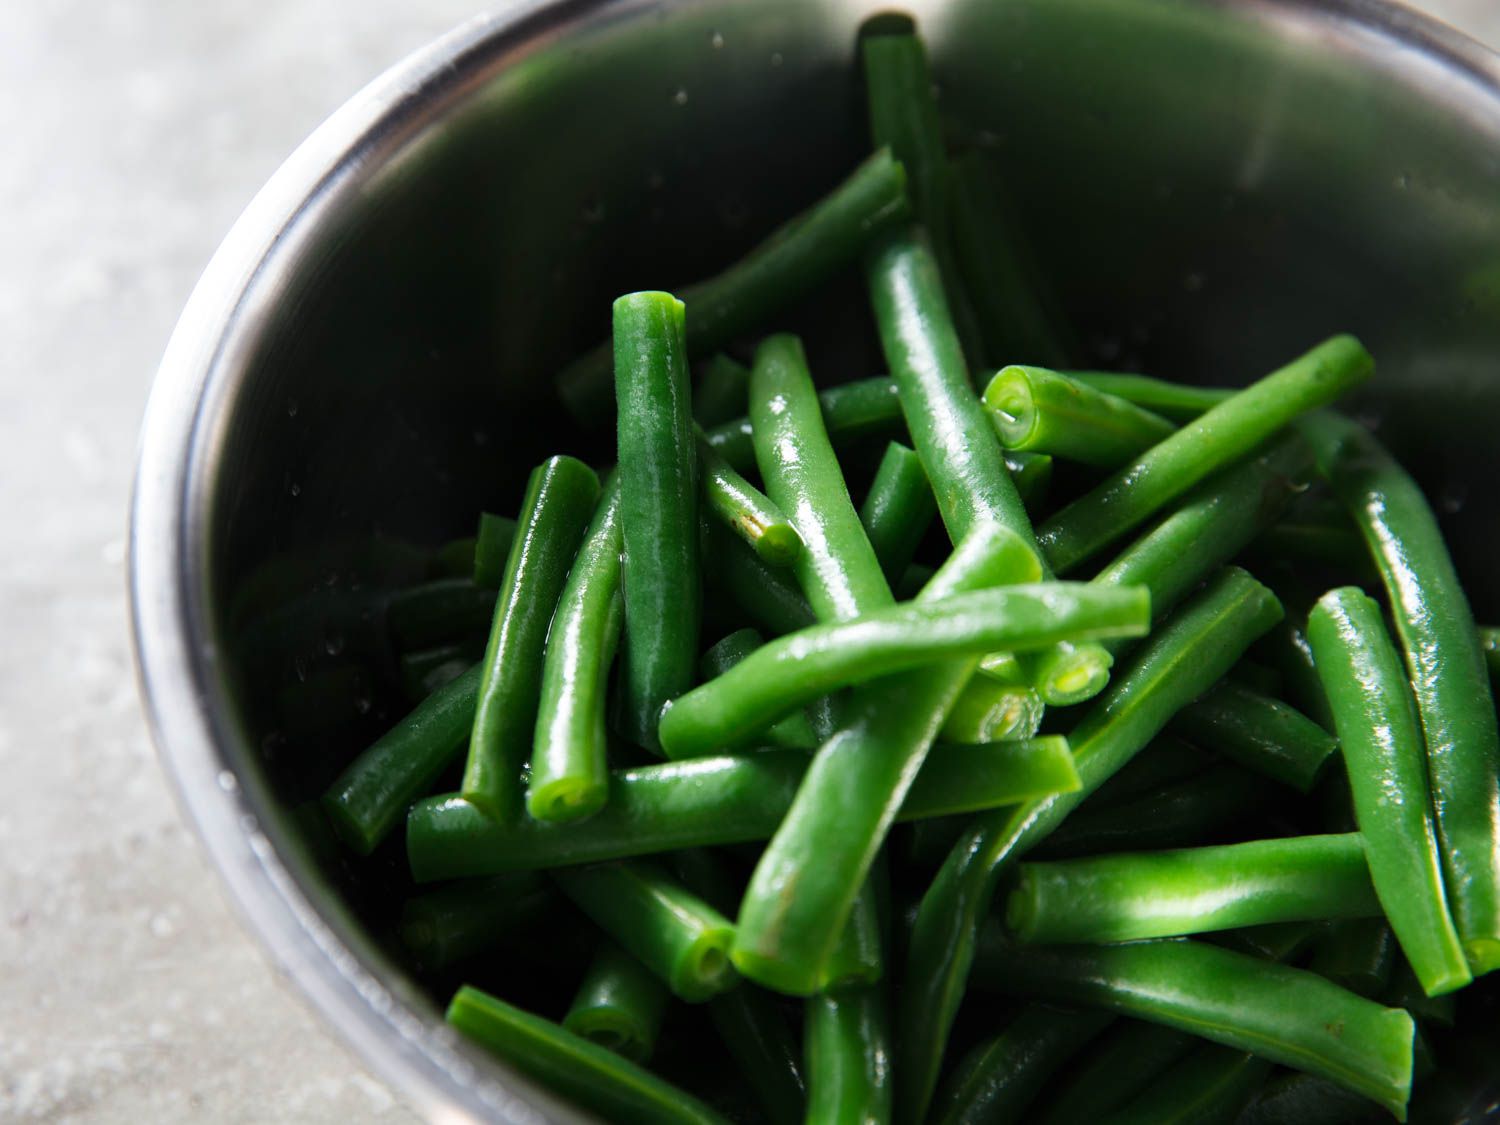 Blanched green beans in a metal bowl